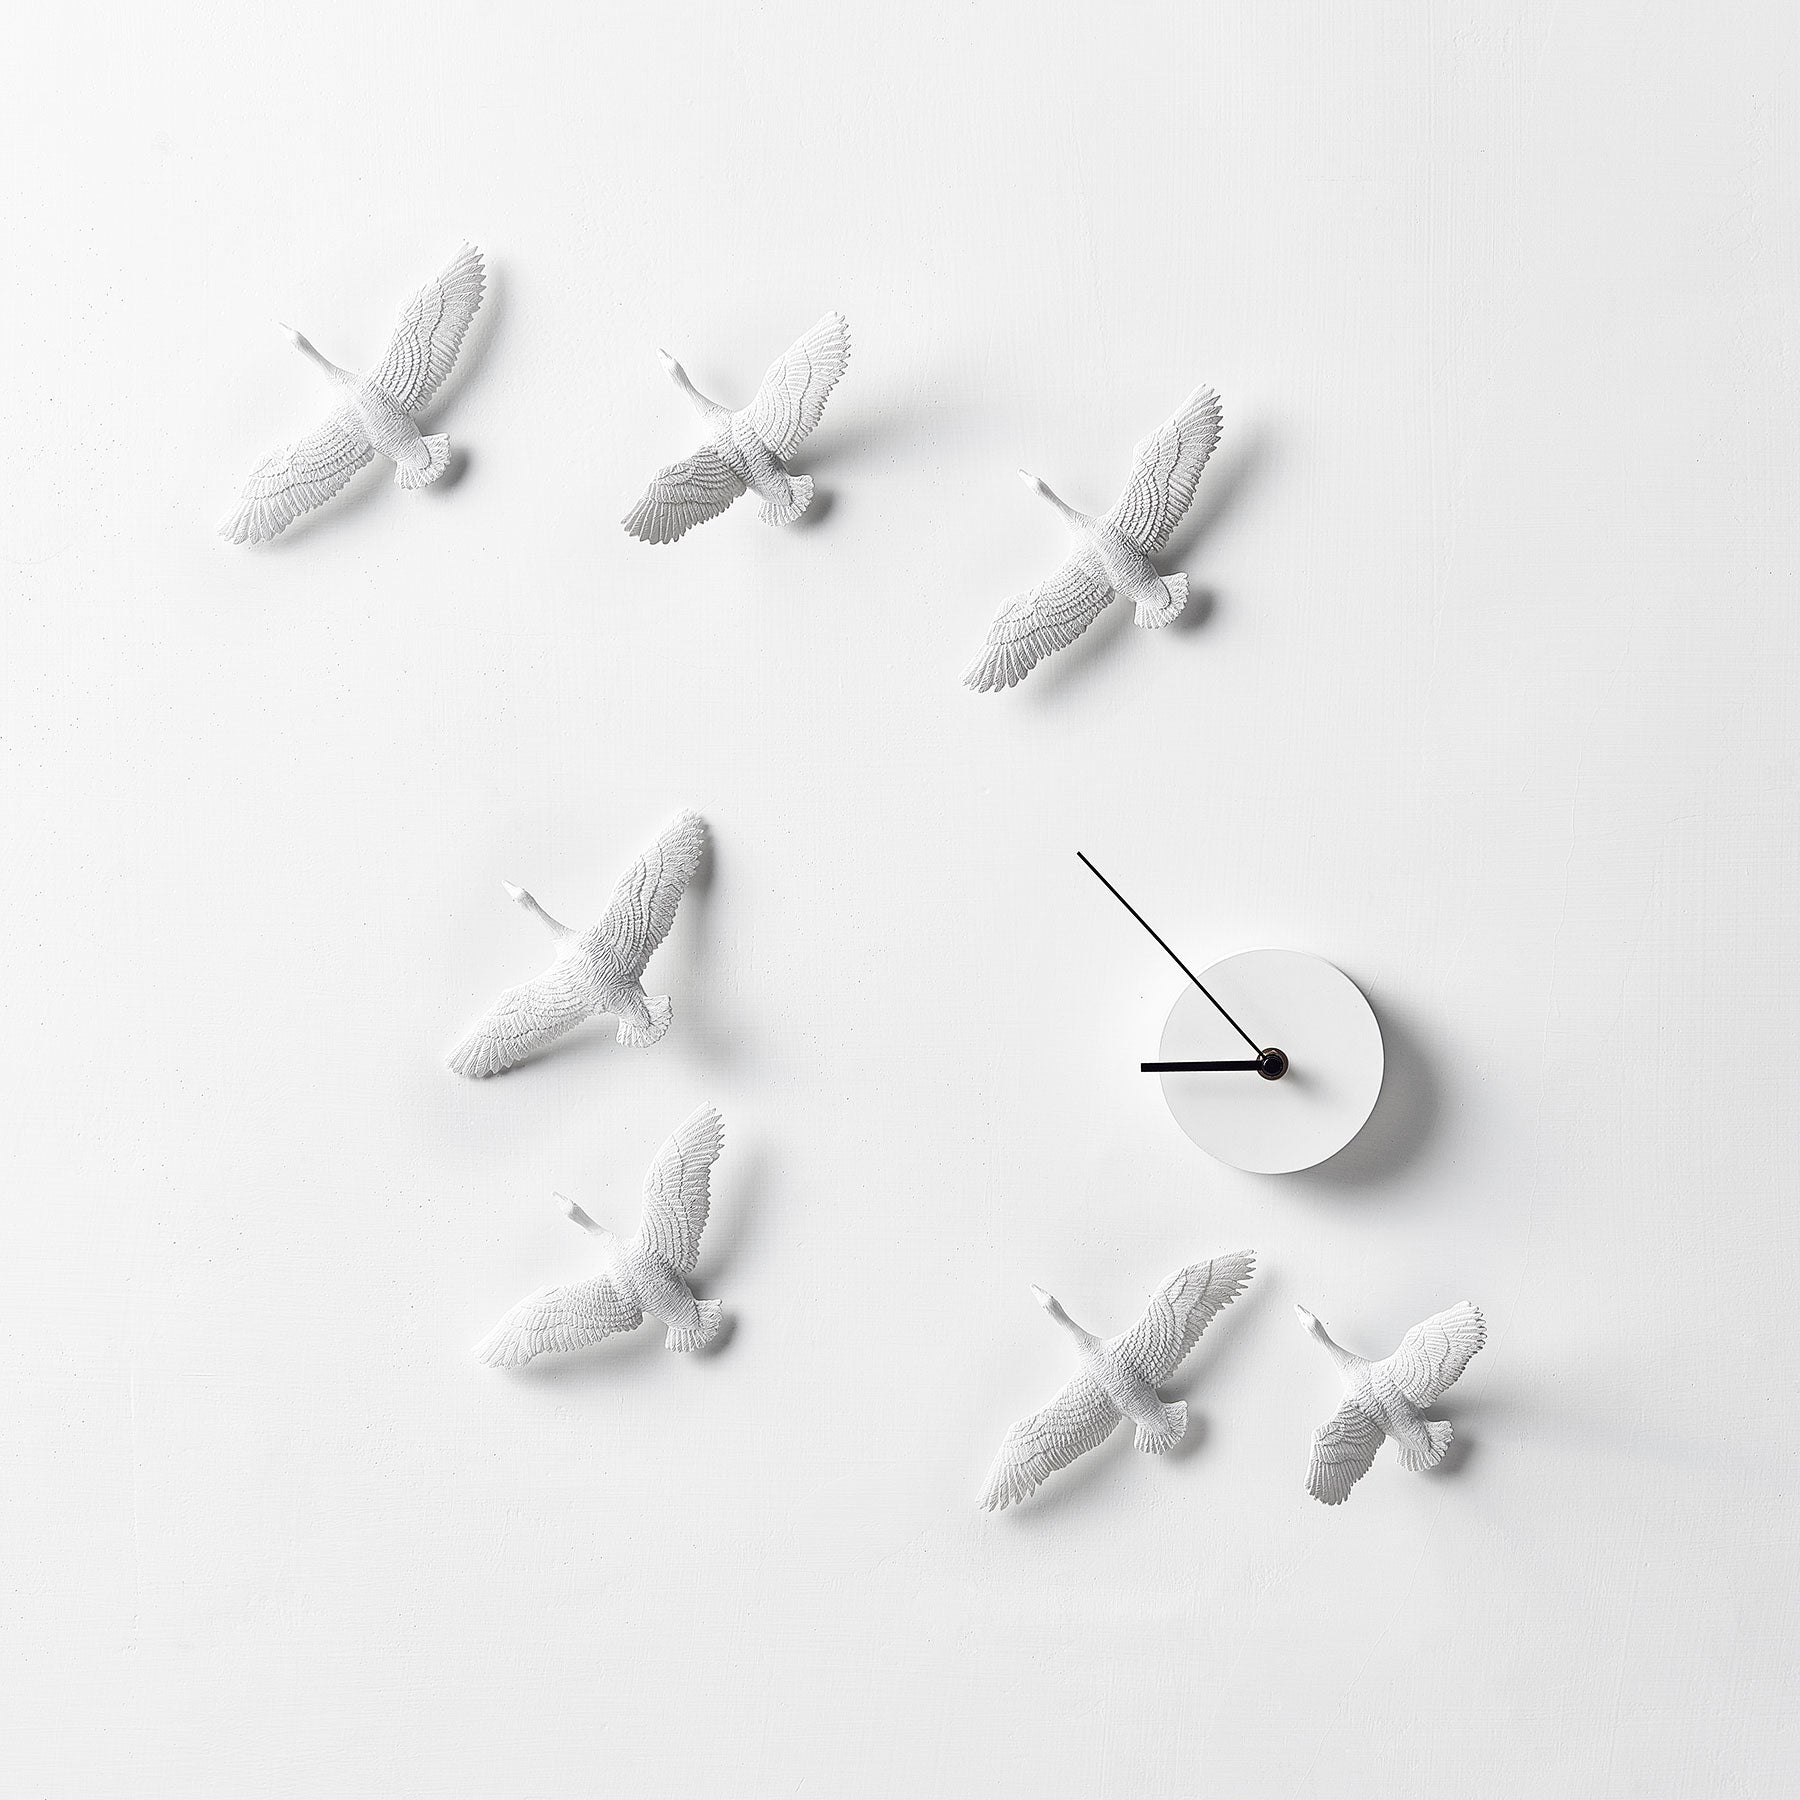 Migratory Birds Minimalist Wall Clock with Resin Sculpture a Philosophical & Modern View of Time